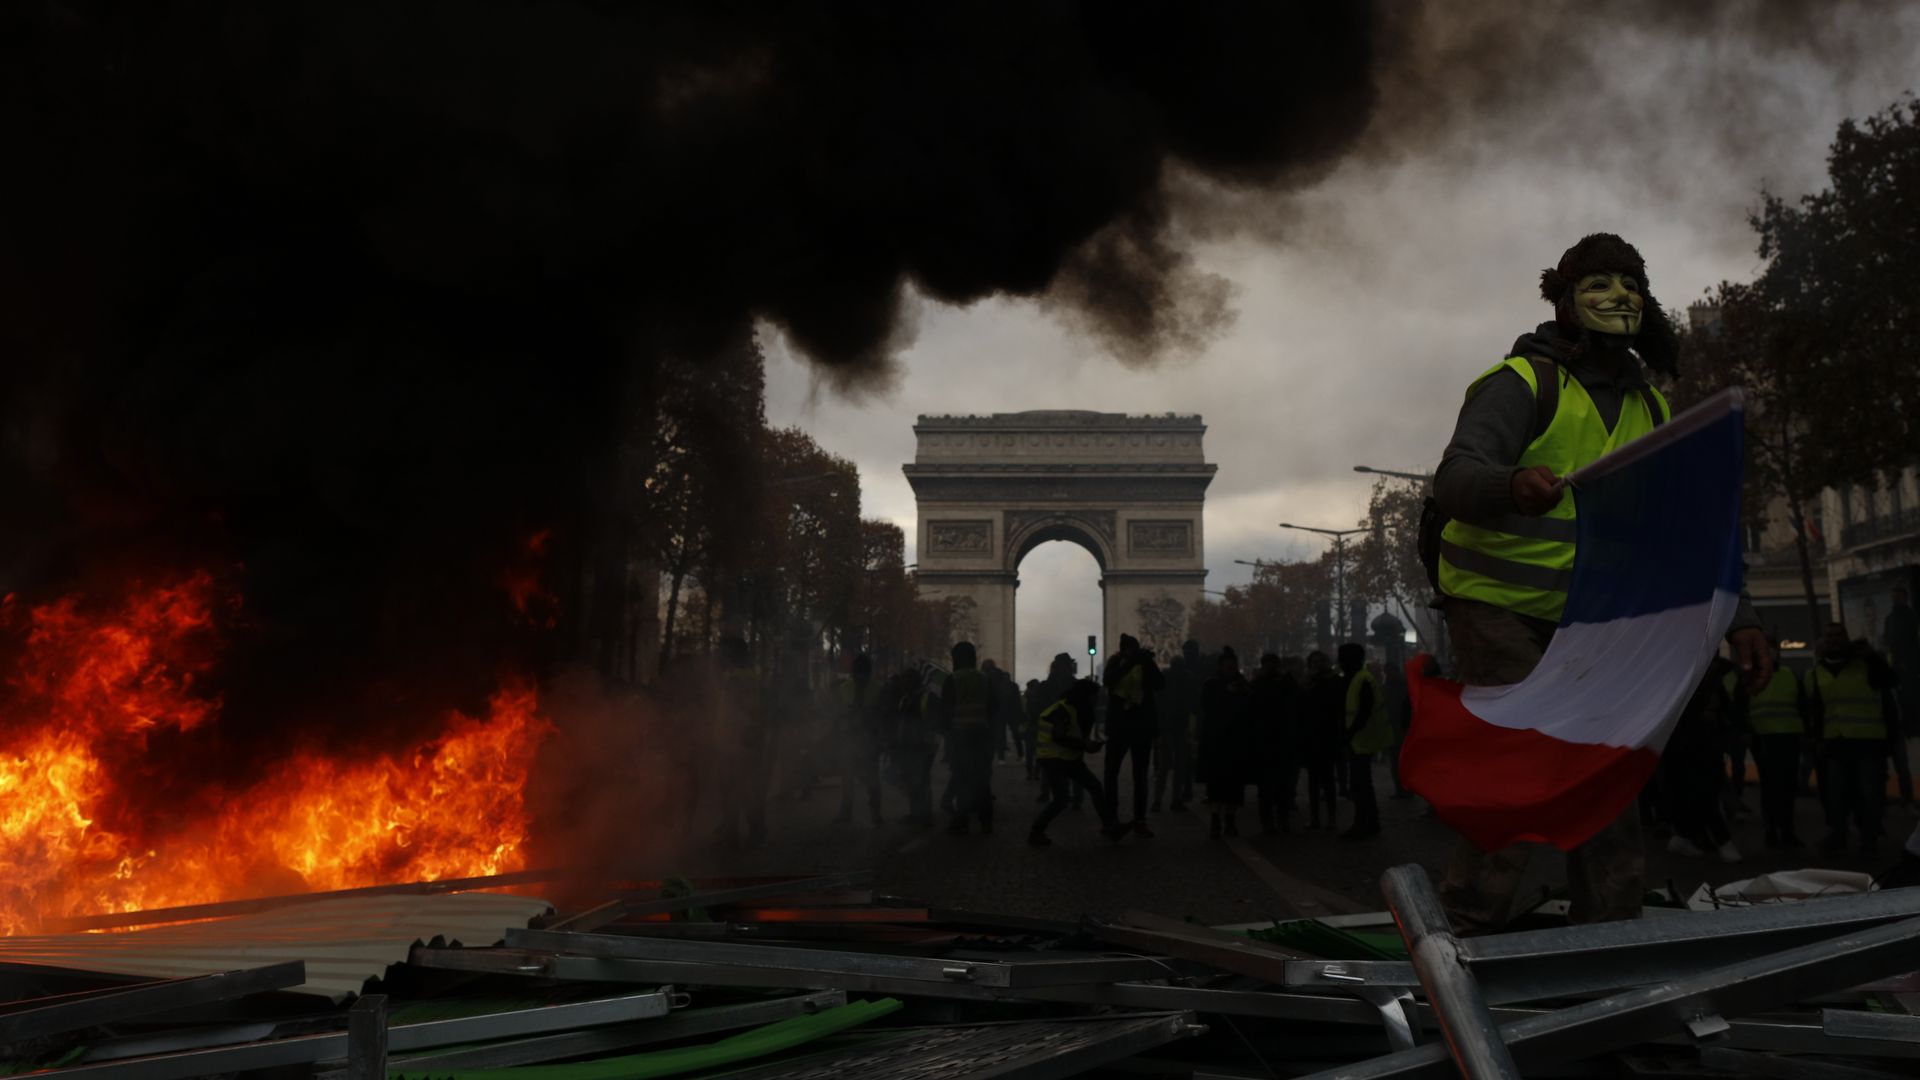 Yellow vests (Gilets jaunes) protestors shout slogans as material burns during a protest against rising oil prices and living costs near the Arc of Triomphe on the Champs Elysees in Paris